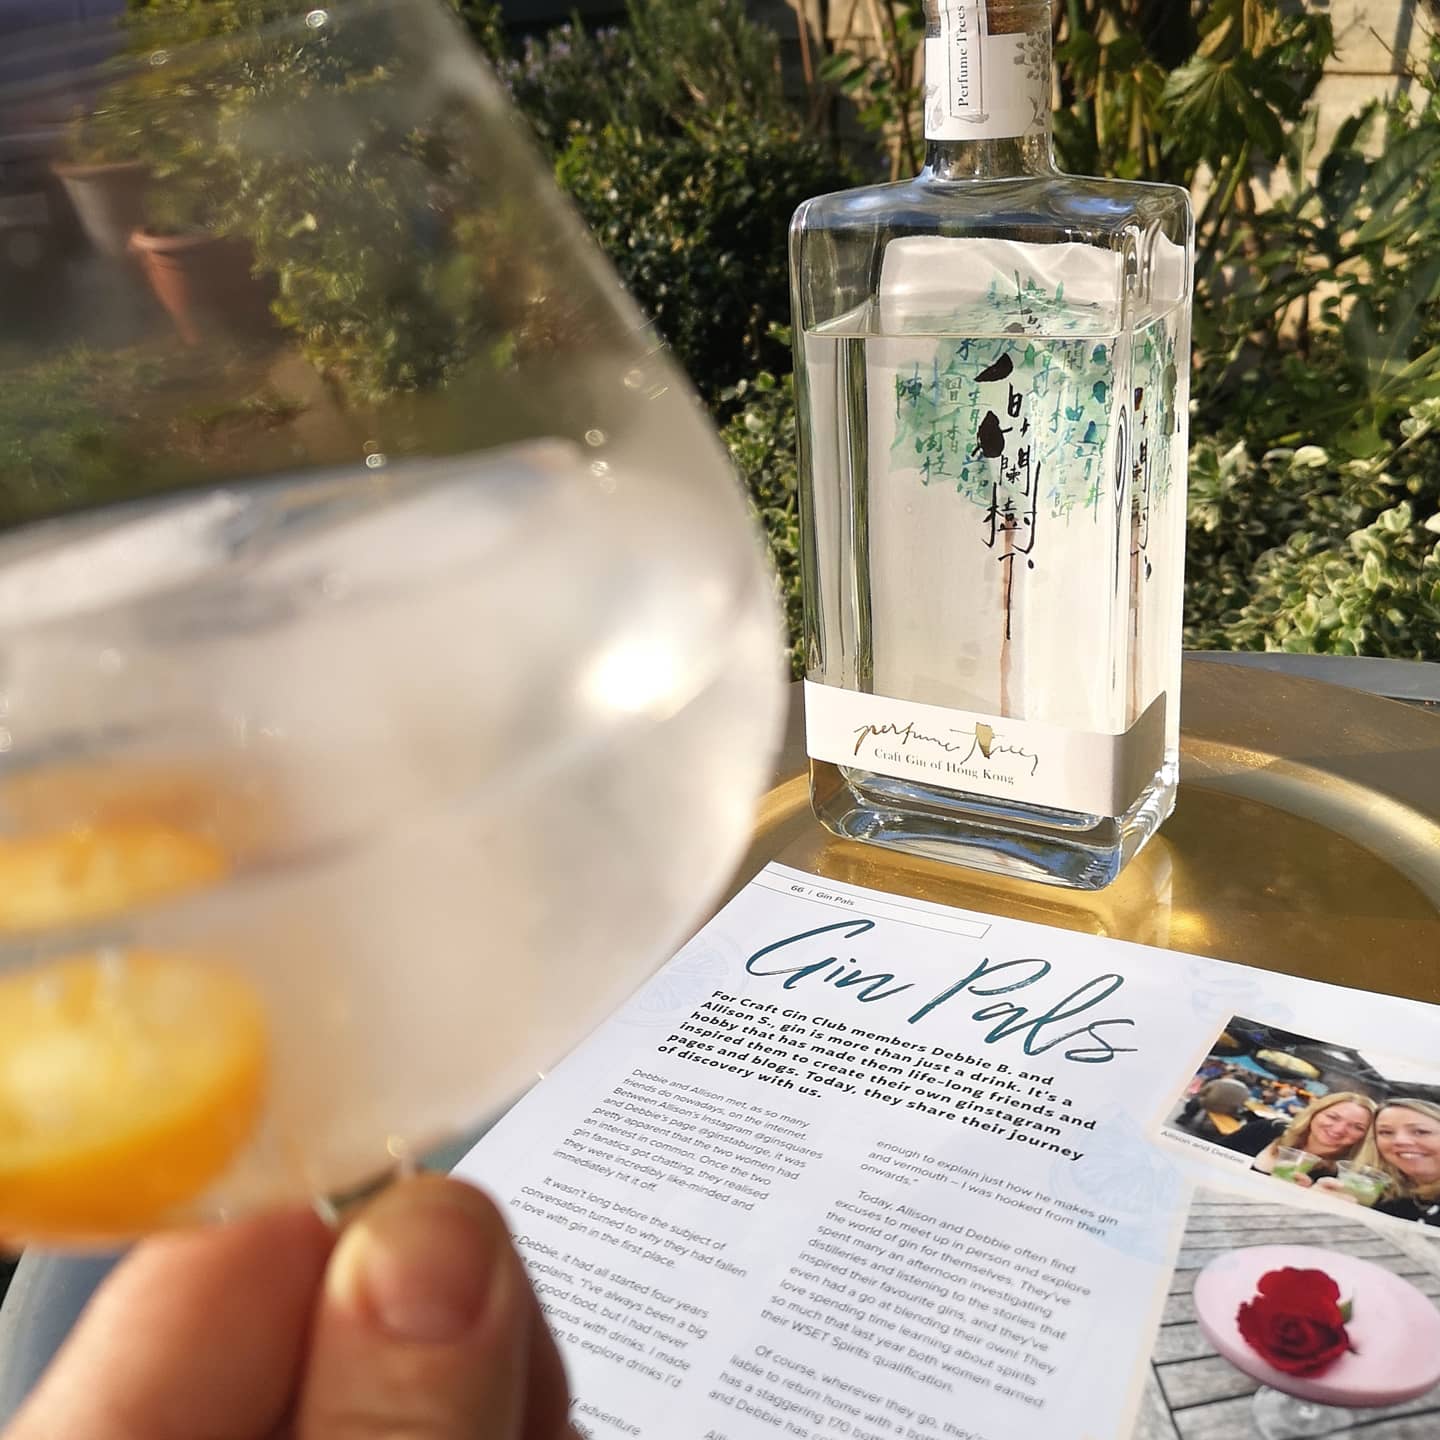 Review of Craft Gin Club Subscription